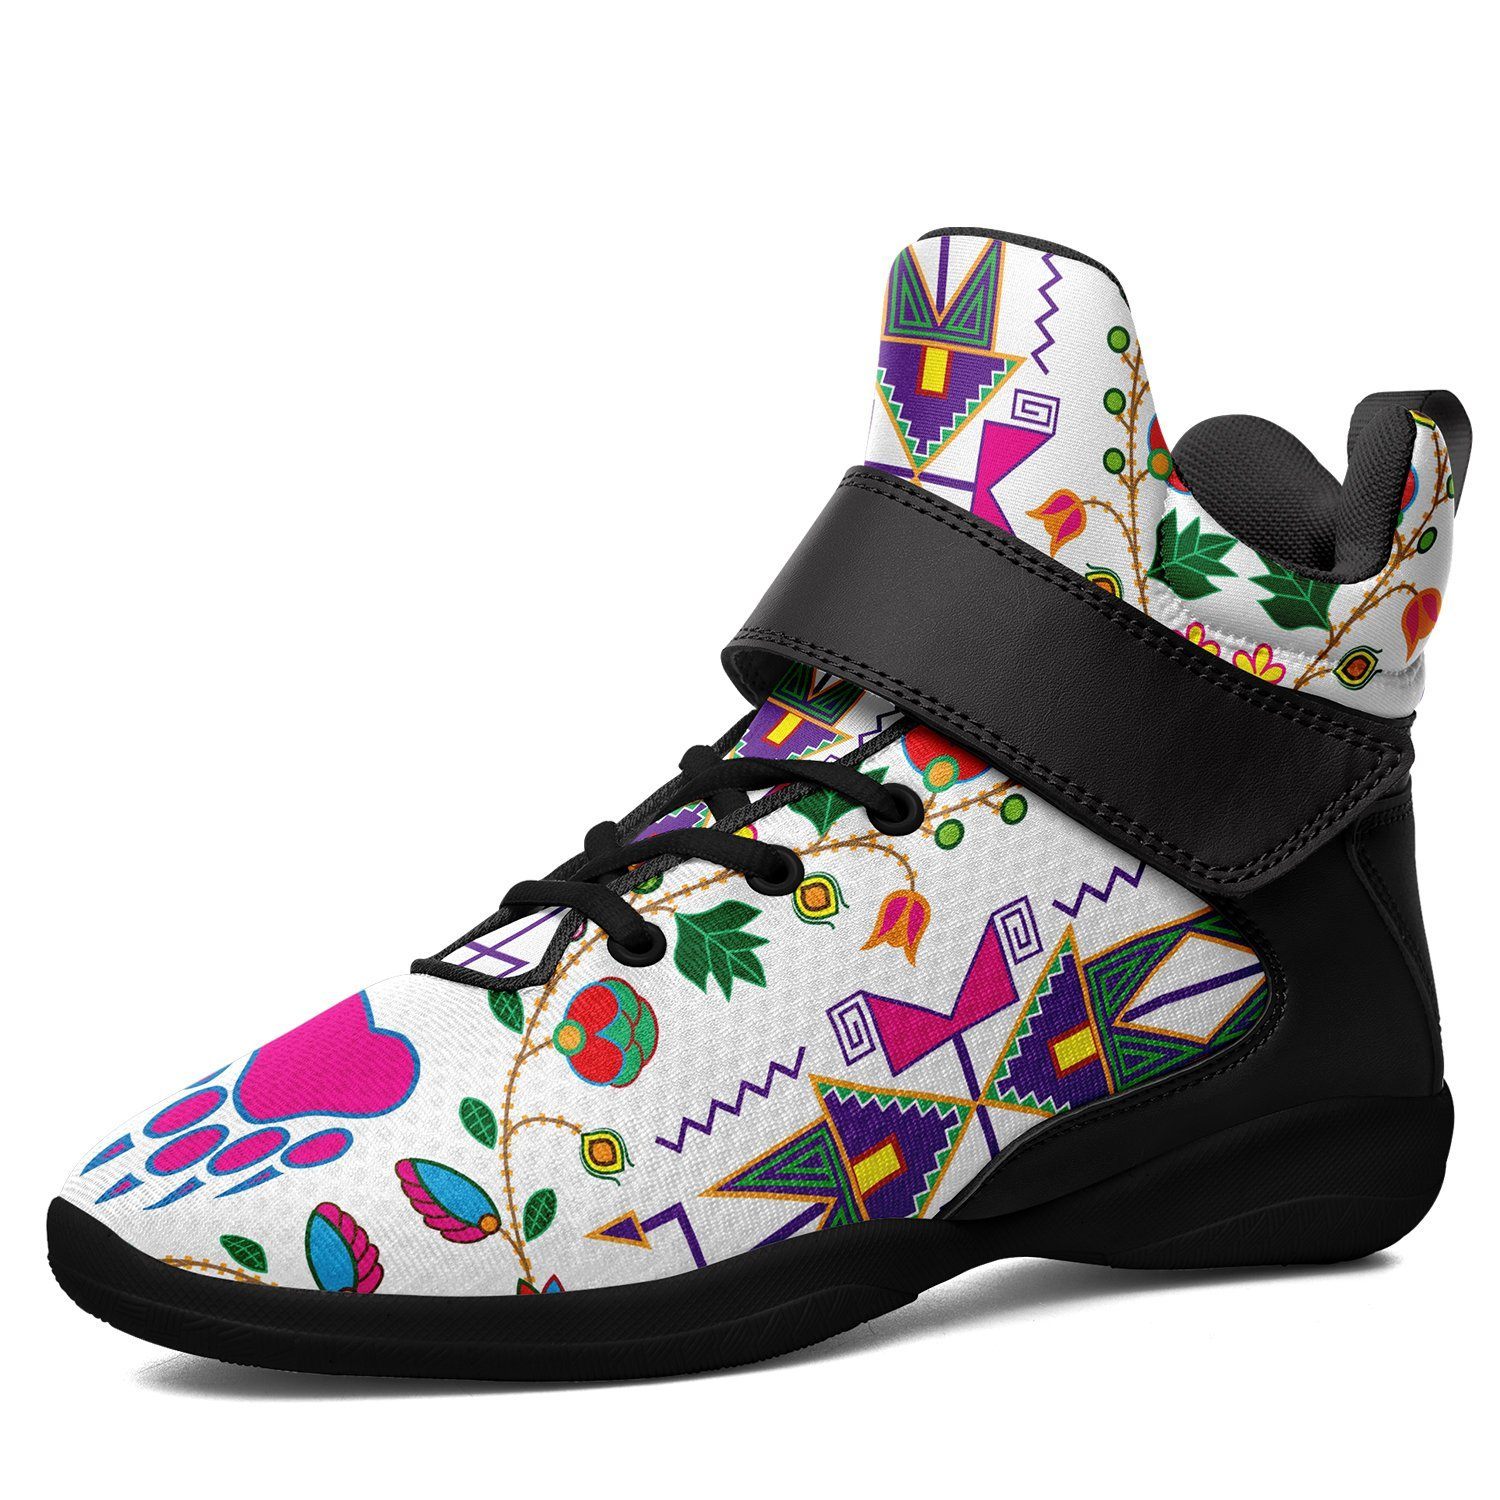 Geometric Floral Fall White Ipottaa Basketball / Sport High Top Shoes - Black Sole 49 Dzine US Men 7 / EUR 40 Black Sole with Black Strap 